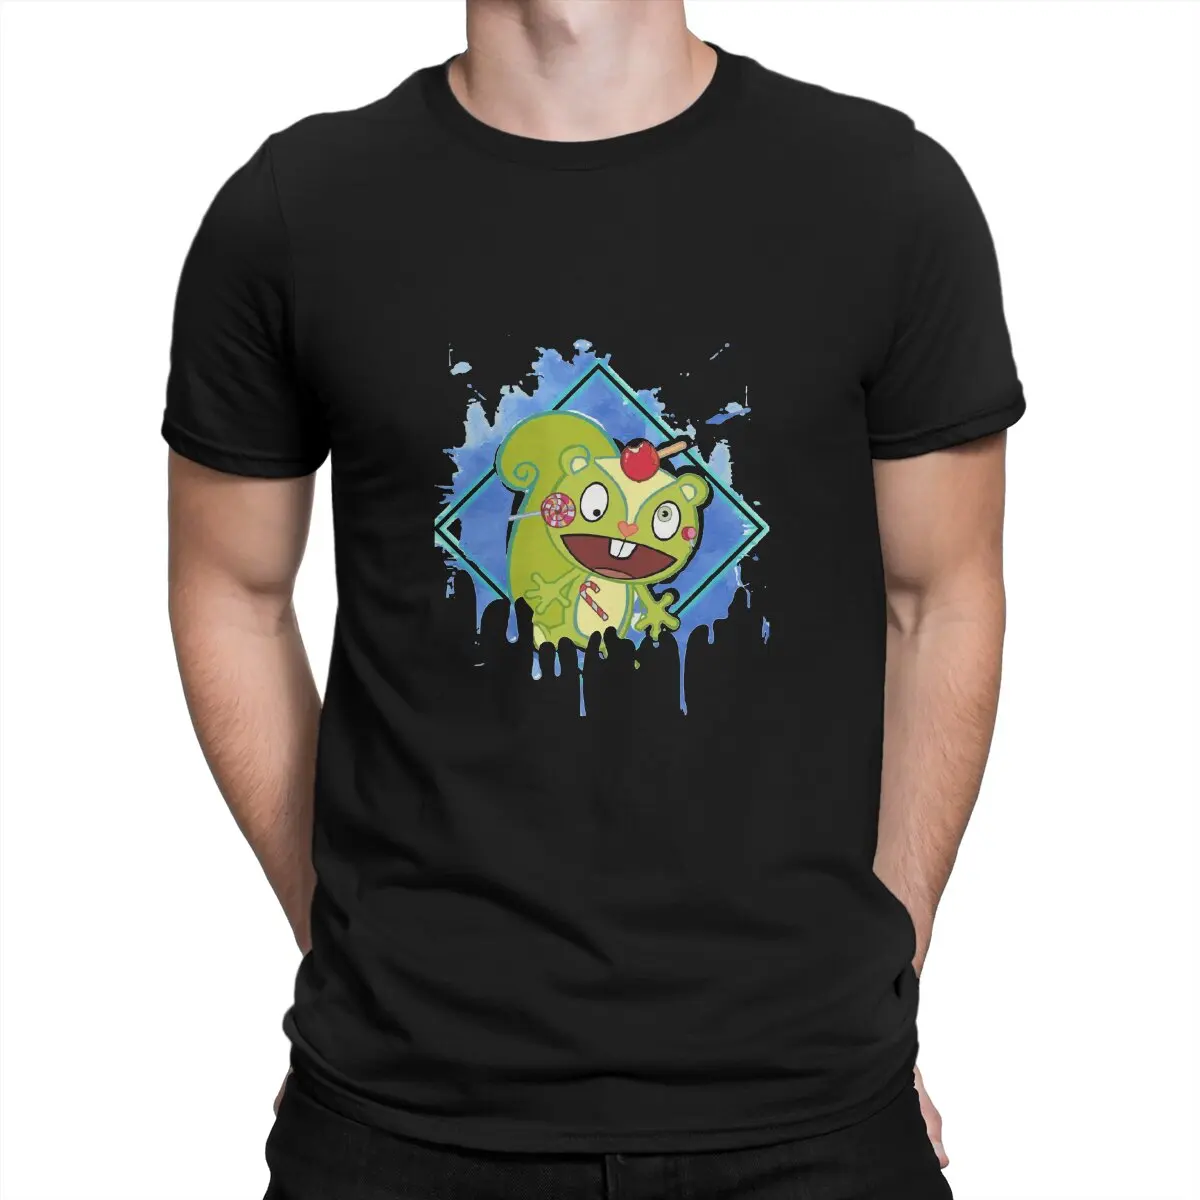 

Nutty Fitting for Fans Magically T-Shirt for Men Happy Tree Friends Cuddles Giggles Anime Novelty 100% Cotton Tee Shirt